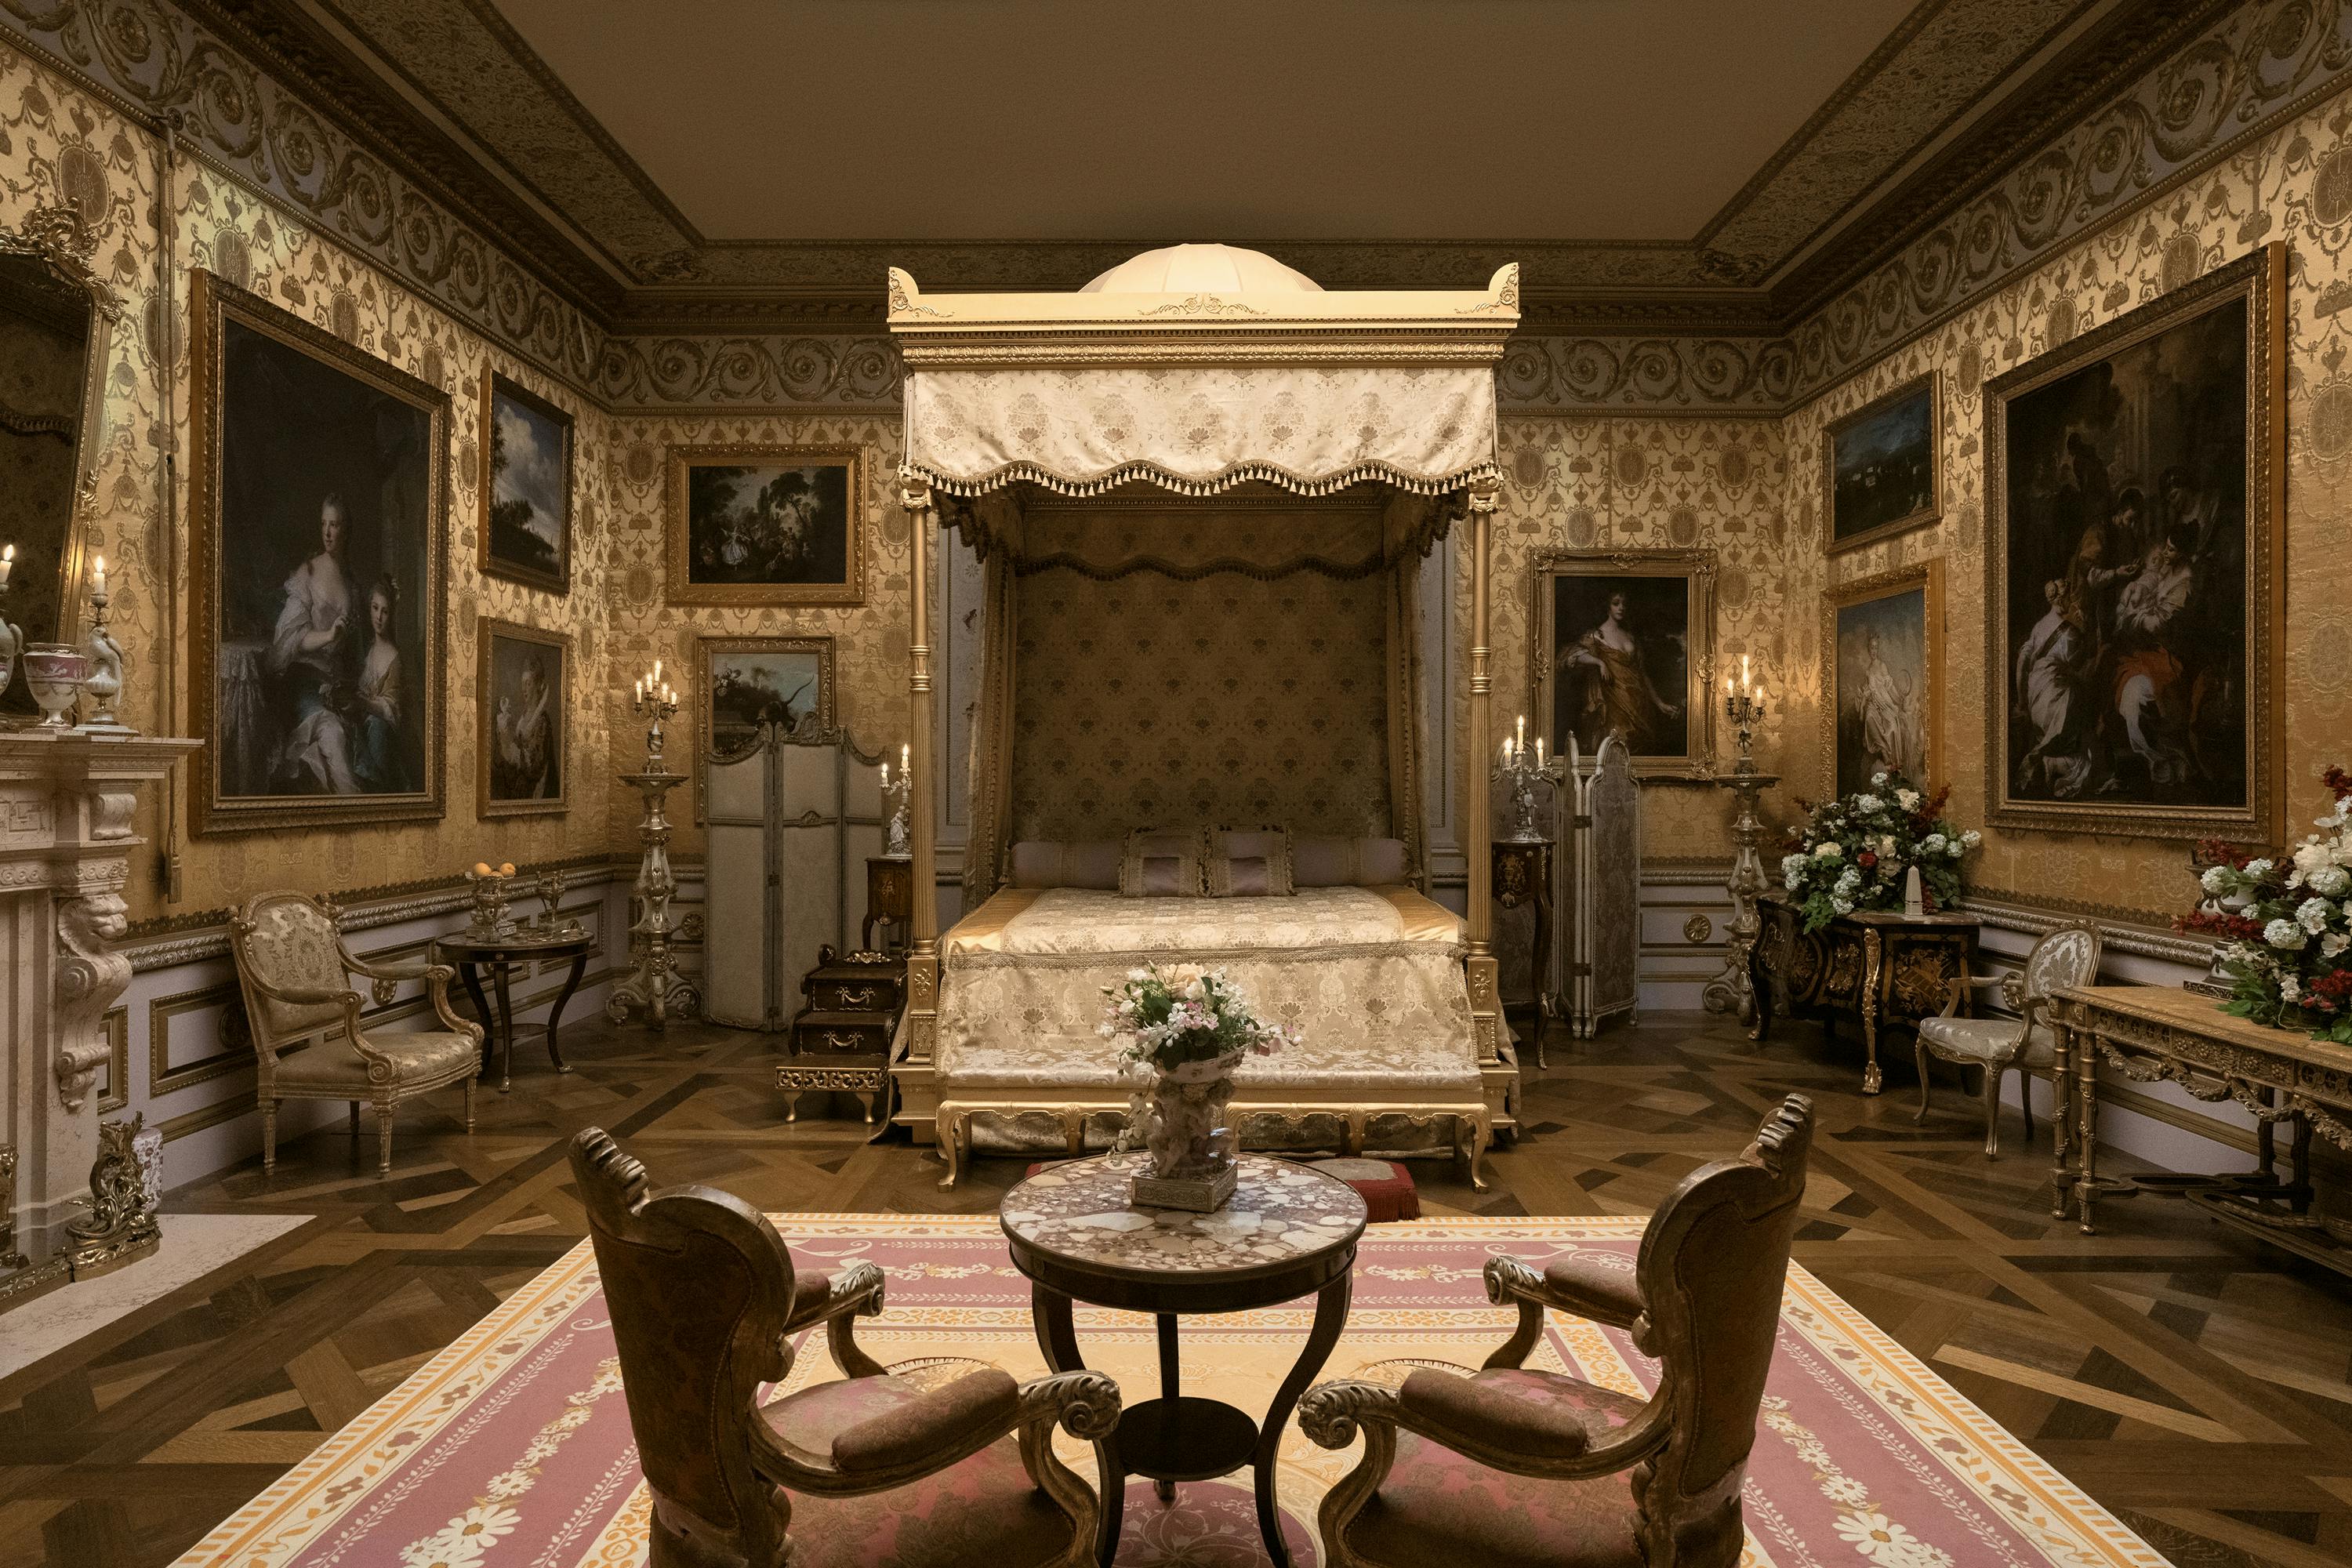 The monarch’s bedroom. A four-poster bed sits in the middle of the room. There is also a small table with two armchairs, and the walls are covered with ornate wallpaper and paintings. The color scheme is red, gold, and brown, and while the room looks cozy, its also very ornate and formal.